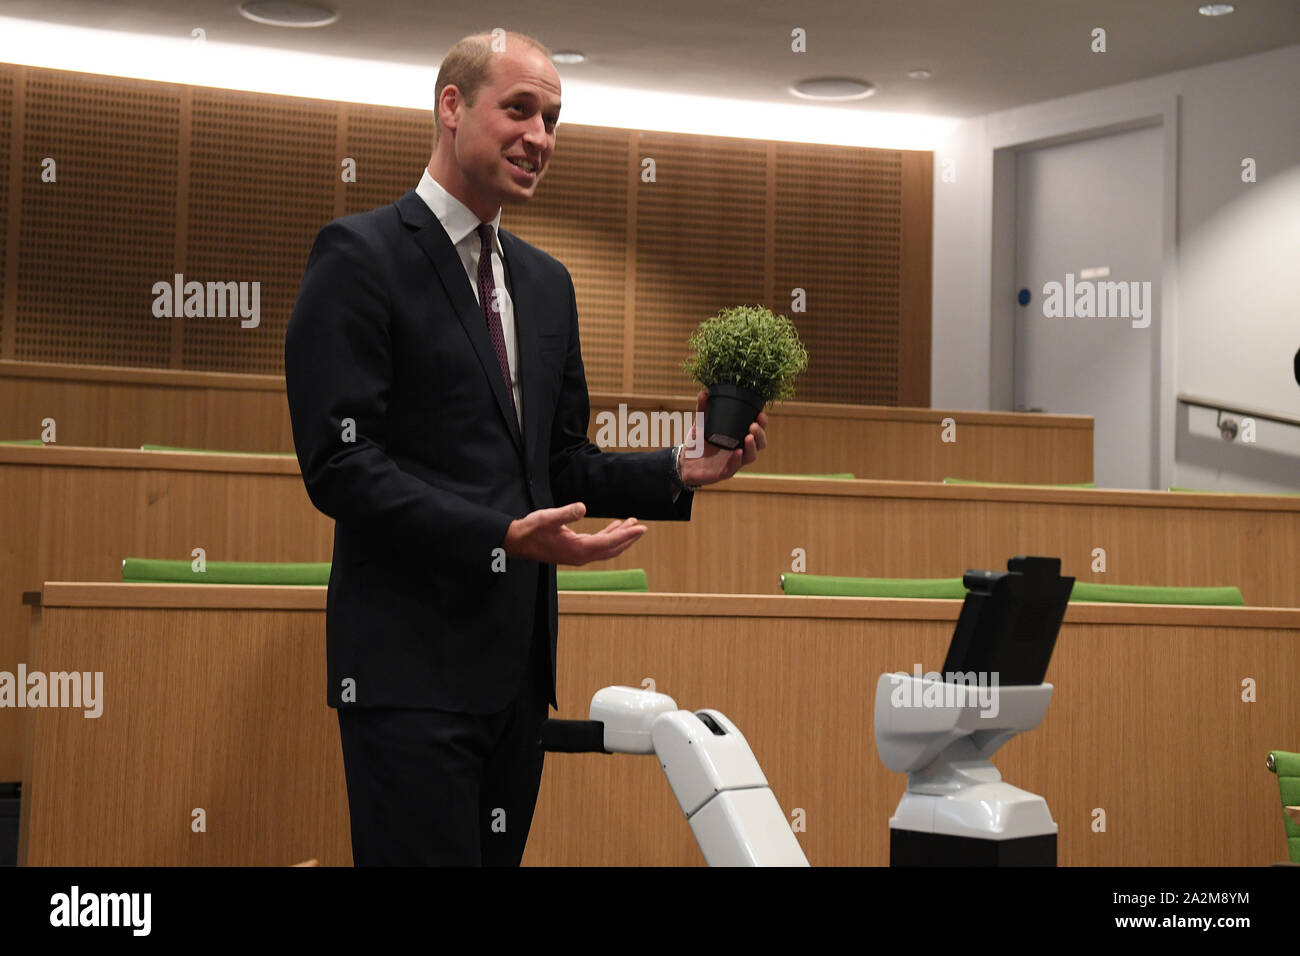 The Duke of Cambridge interacts with Bambam, a robot designed to ...